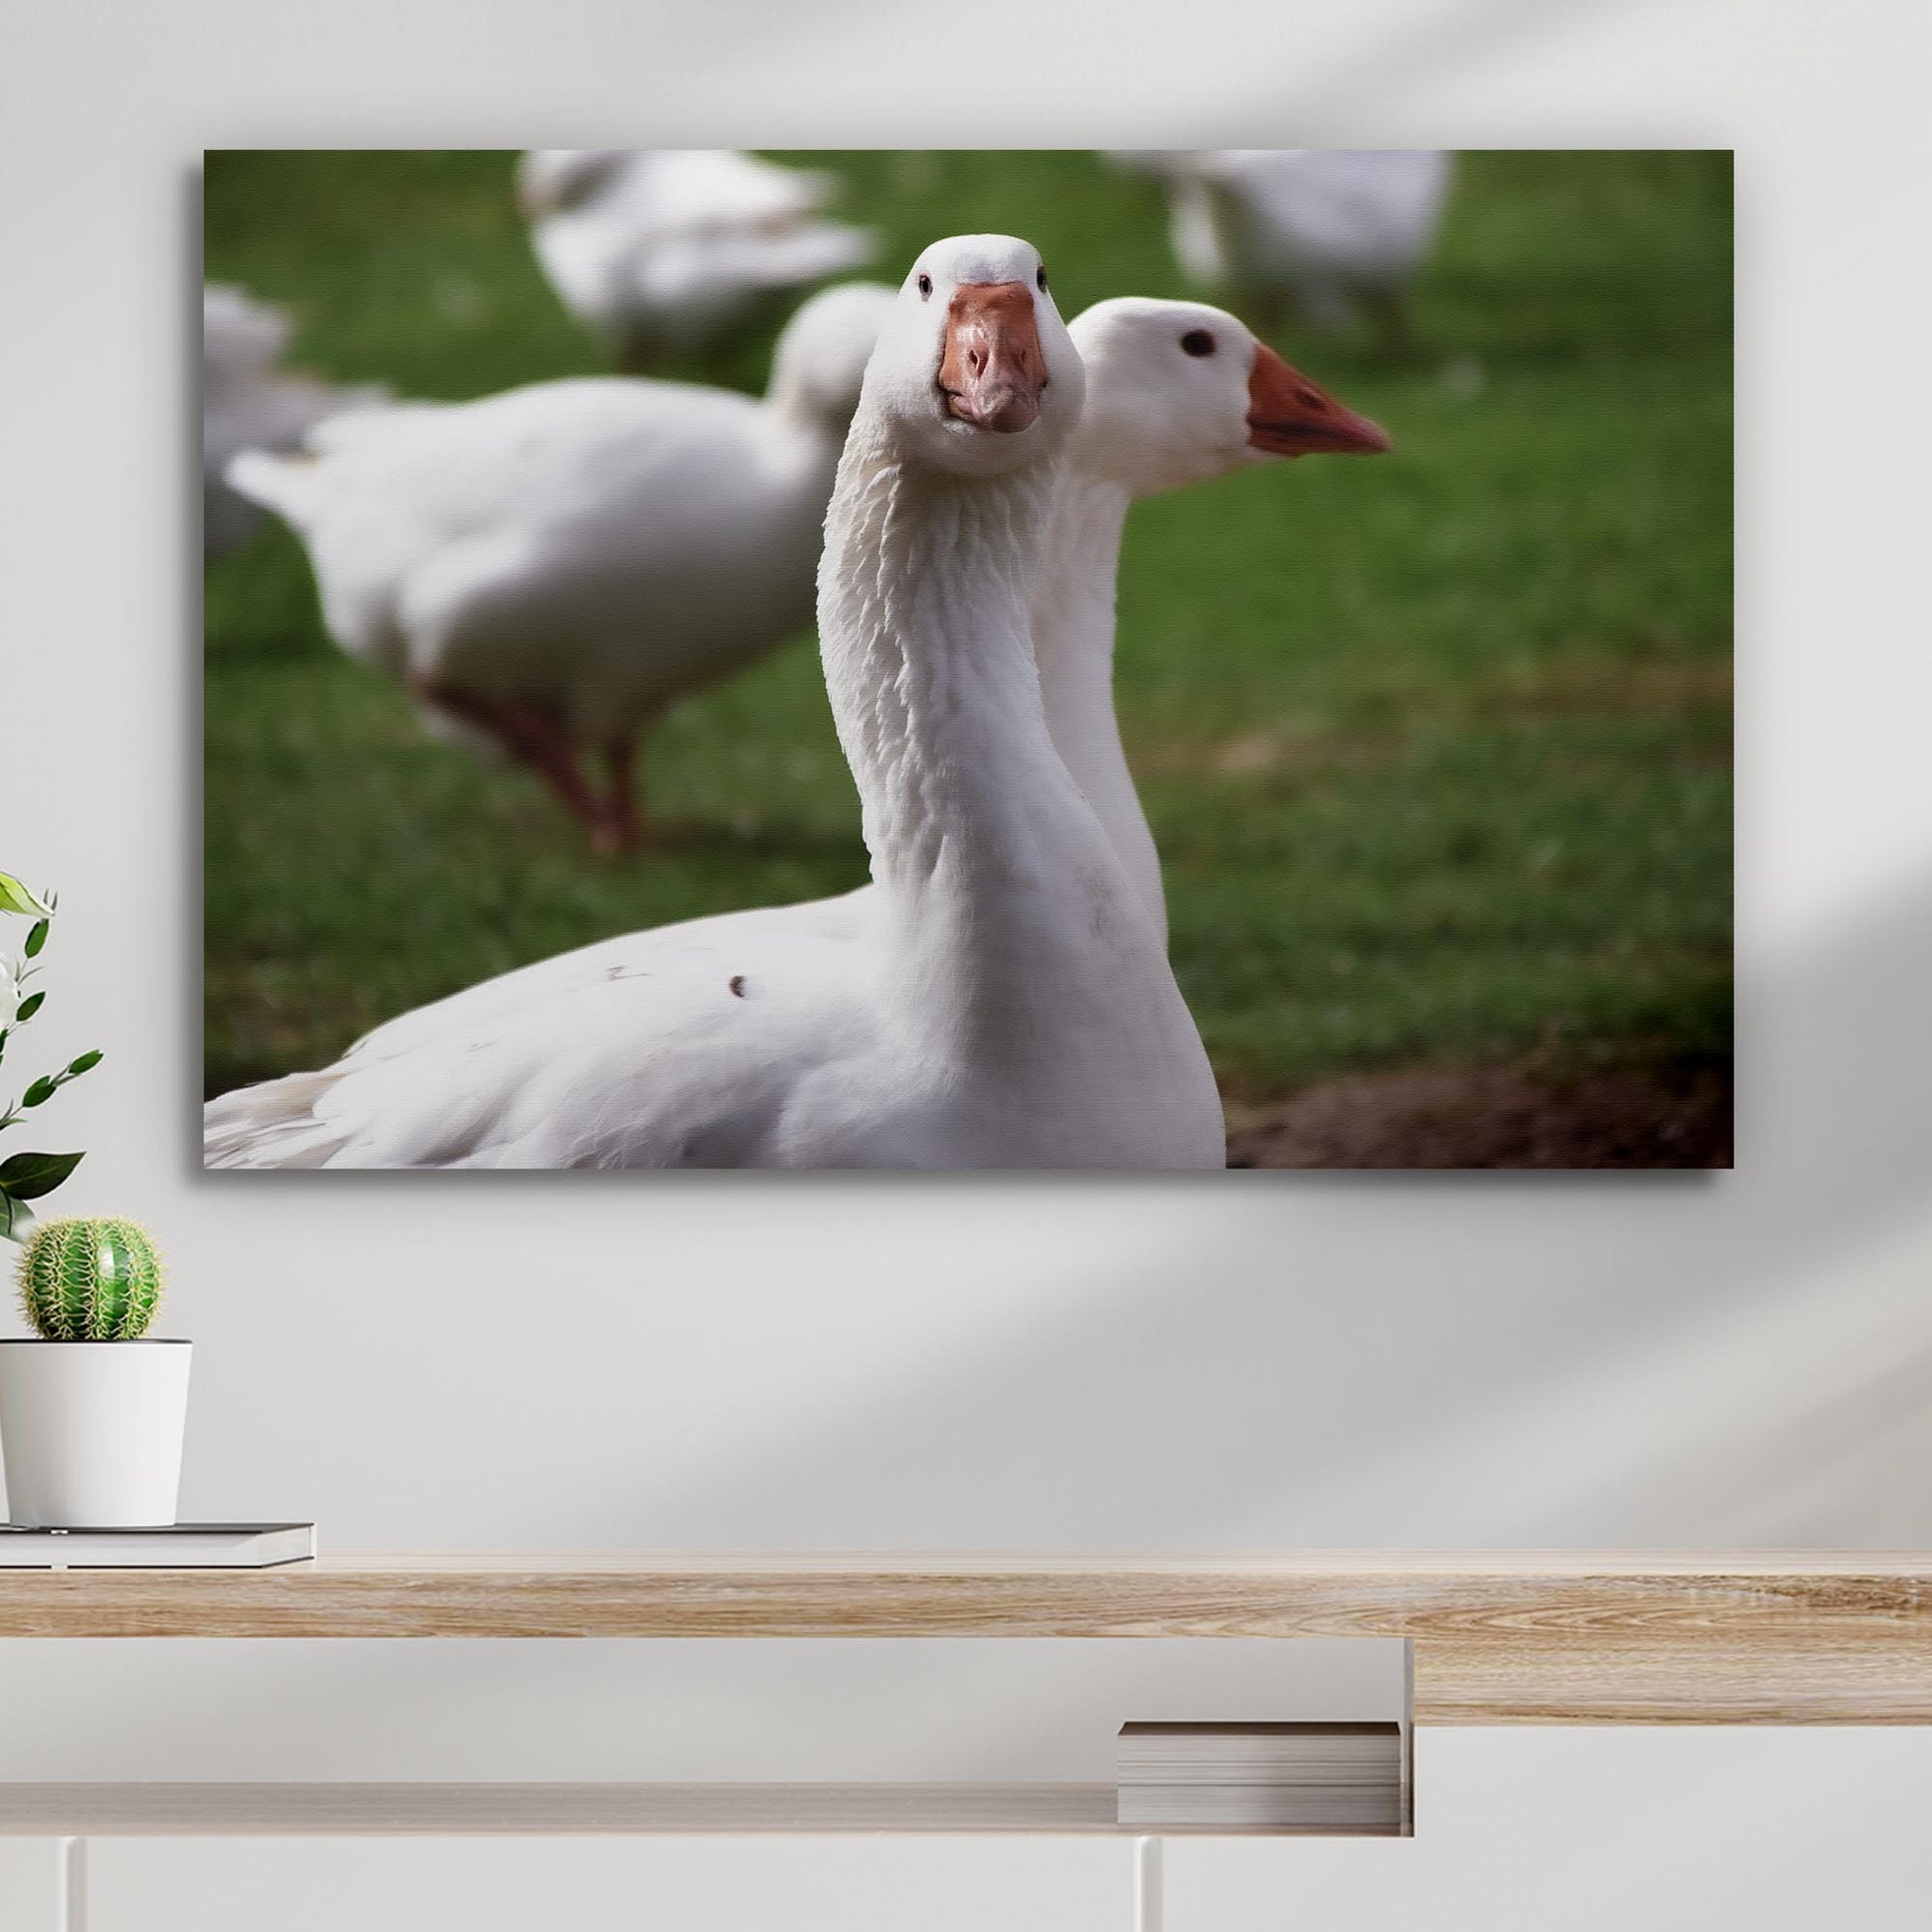 Curious Geese Canvas Wall Art Style 2 - Image by Tailored Canvases